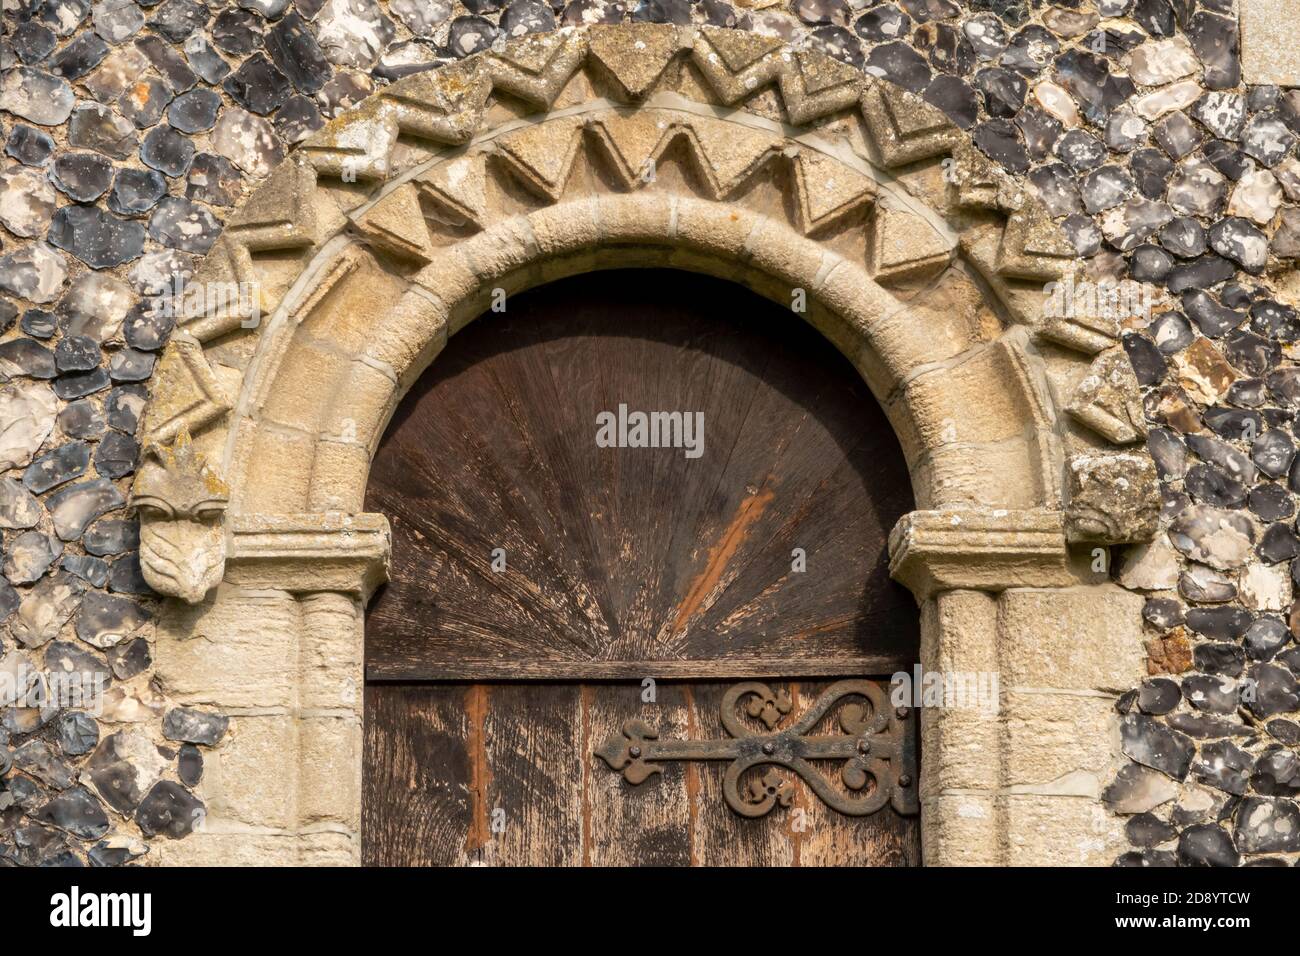 The priest's door, with Norman arch, at the south chapel of St Mary and St Peter's church, Kelsale, Suffolk, UK Stock Photo